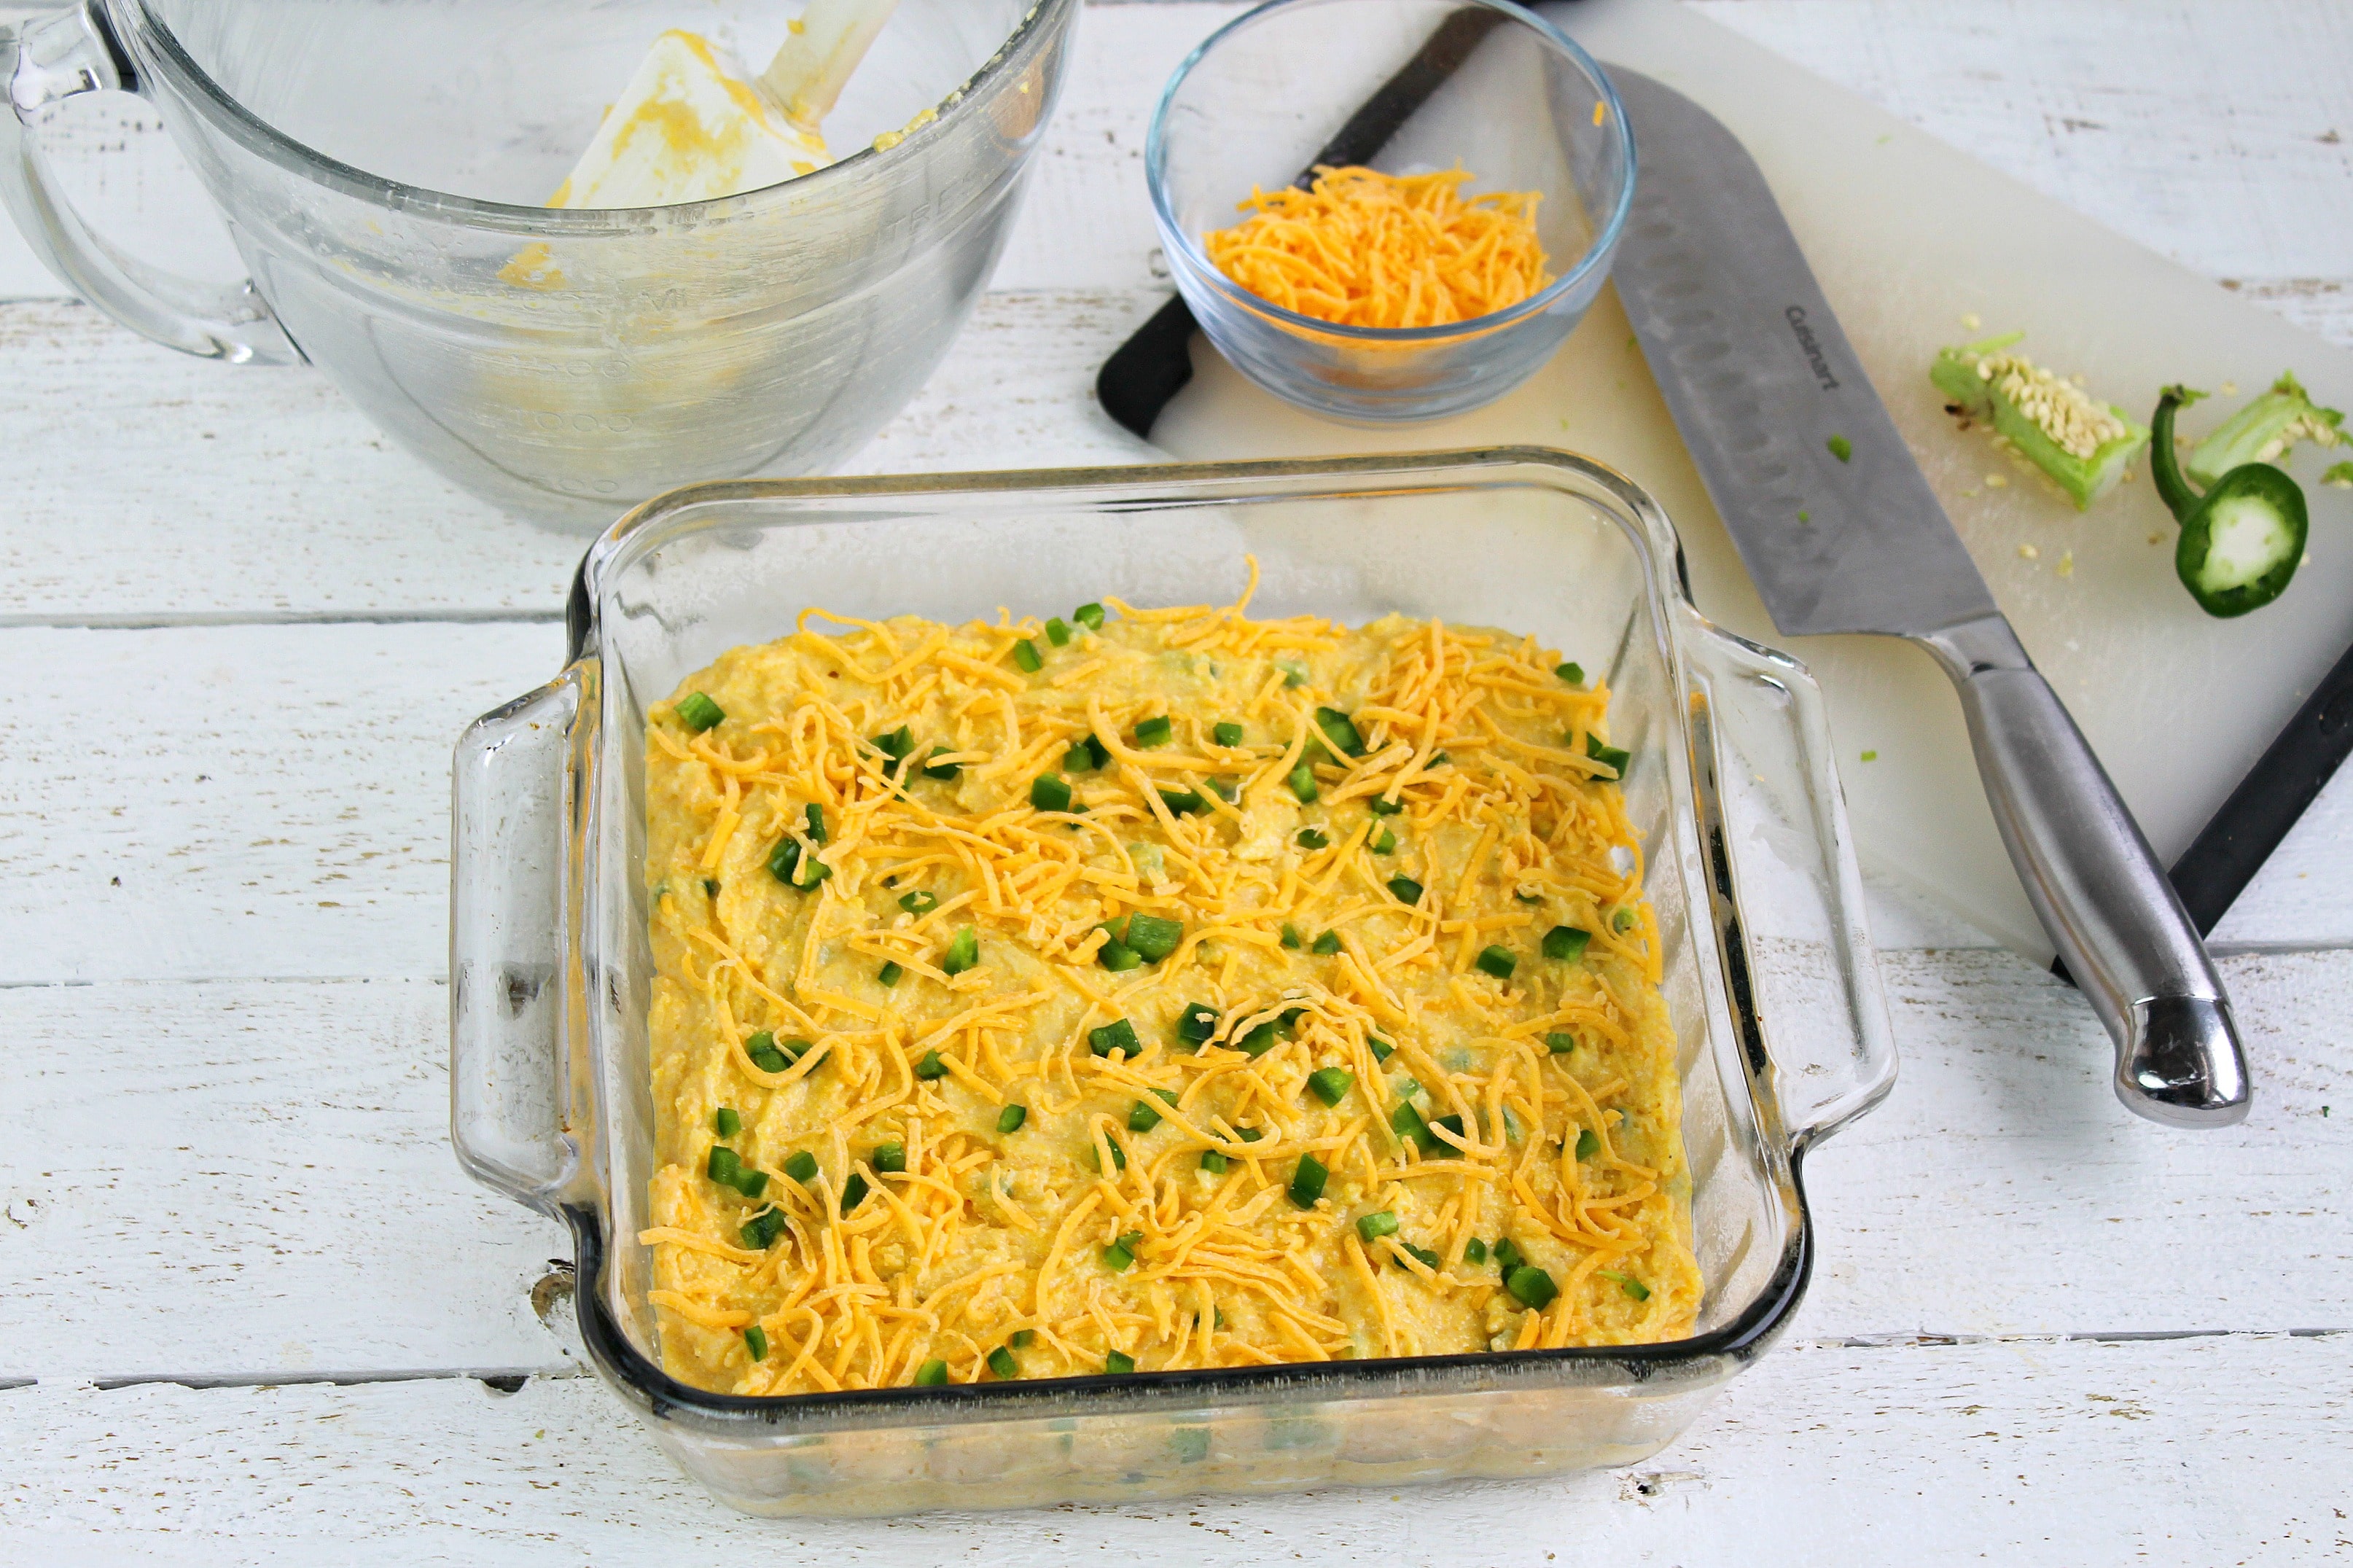 Pour into baking pan and top with jalapenos and shredded cheese